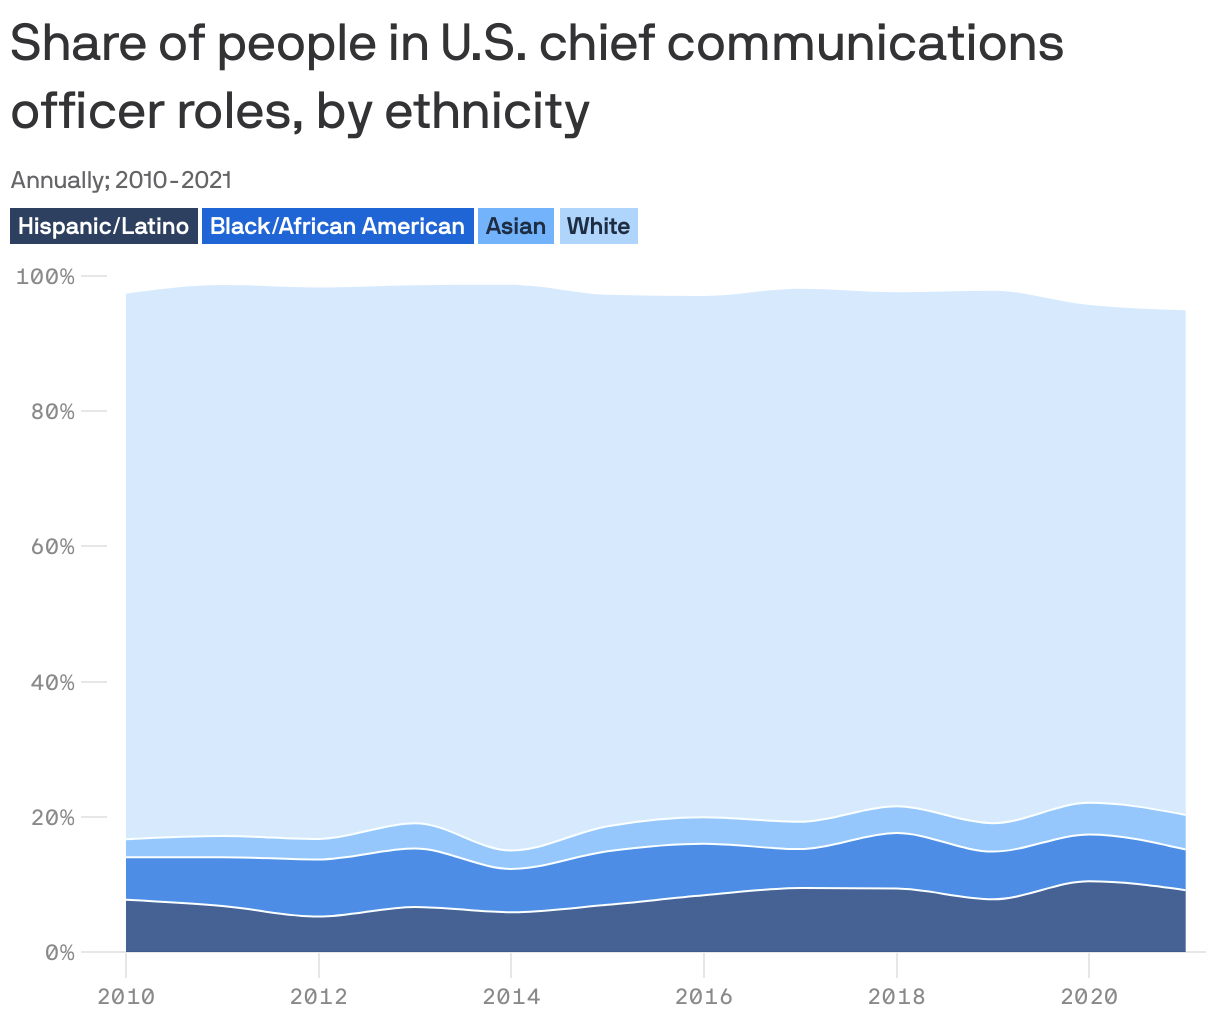 Share of people in U.S. Chief Communication Officer roles, by ethnicity